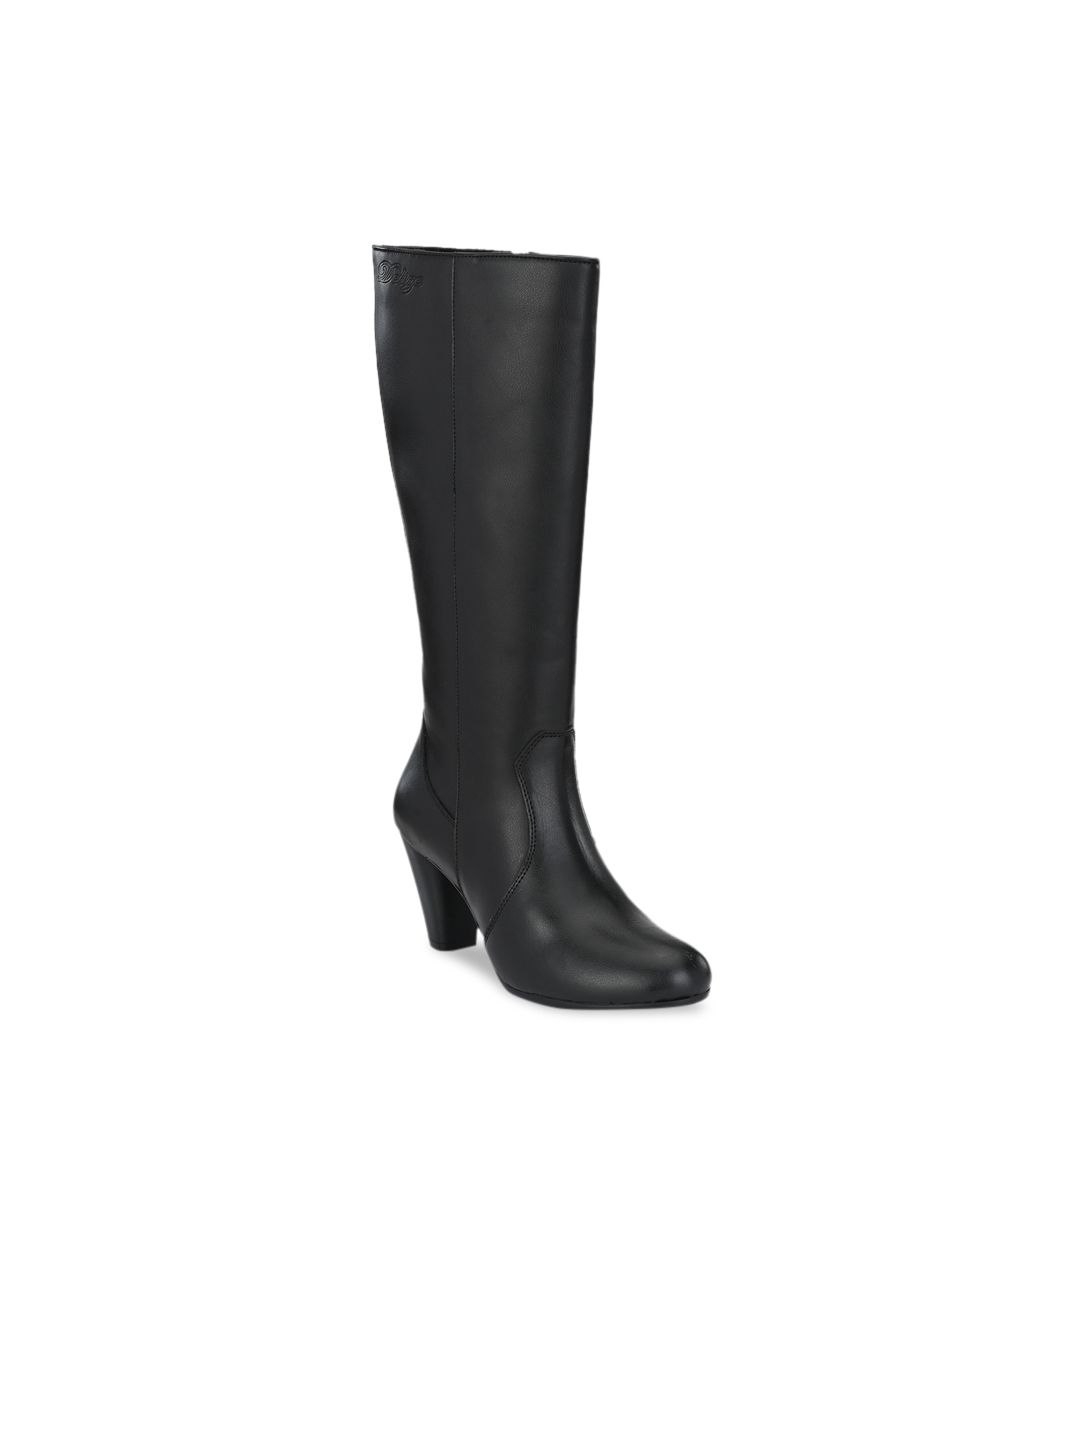 Delize Black Block Heeled Boots Price in India